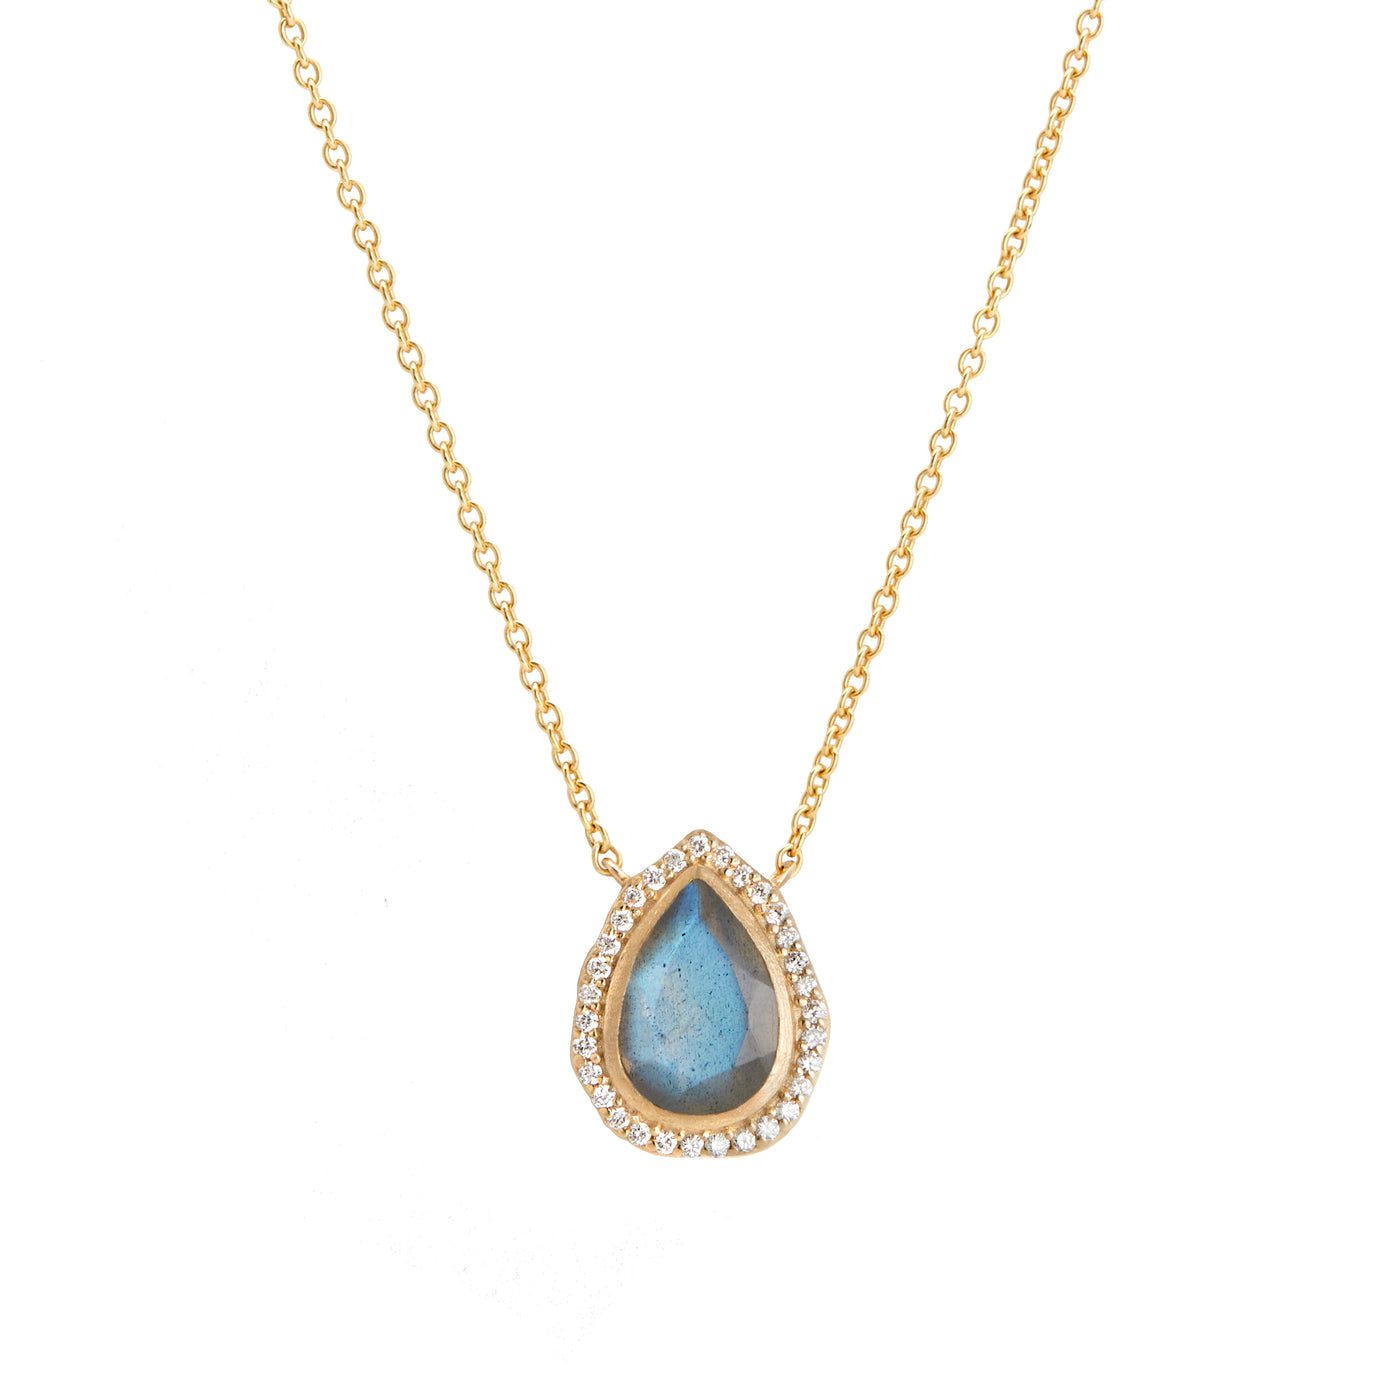 14 Karat Yellow Gold Necklace with Pear Shaped Labradorite Stone with Halo of White Diamonds Against White Background